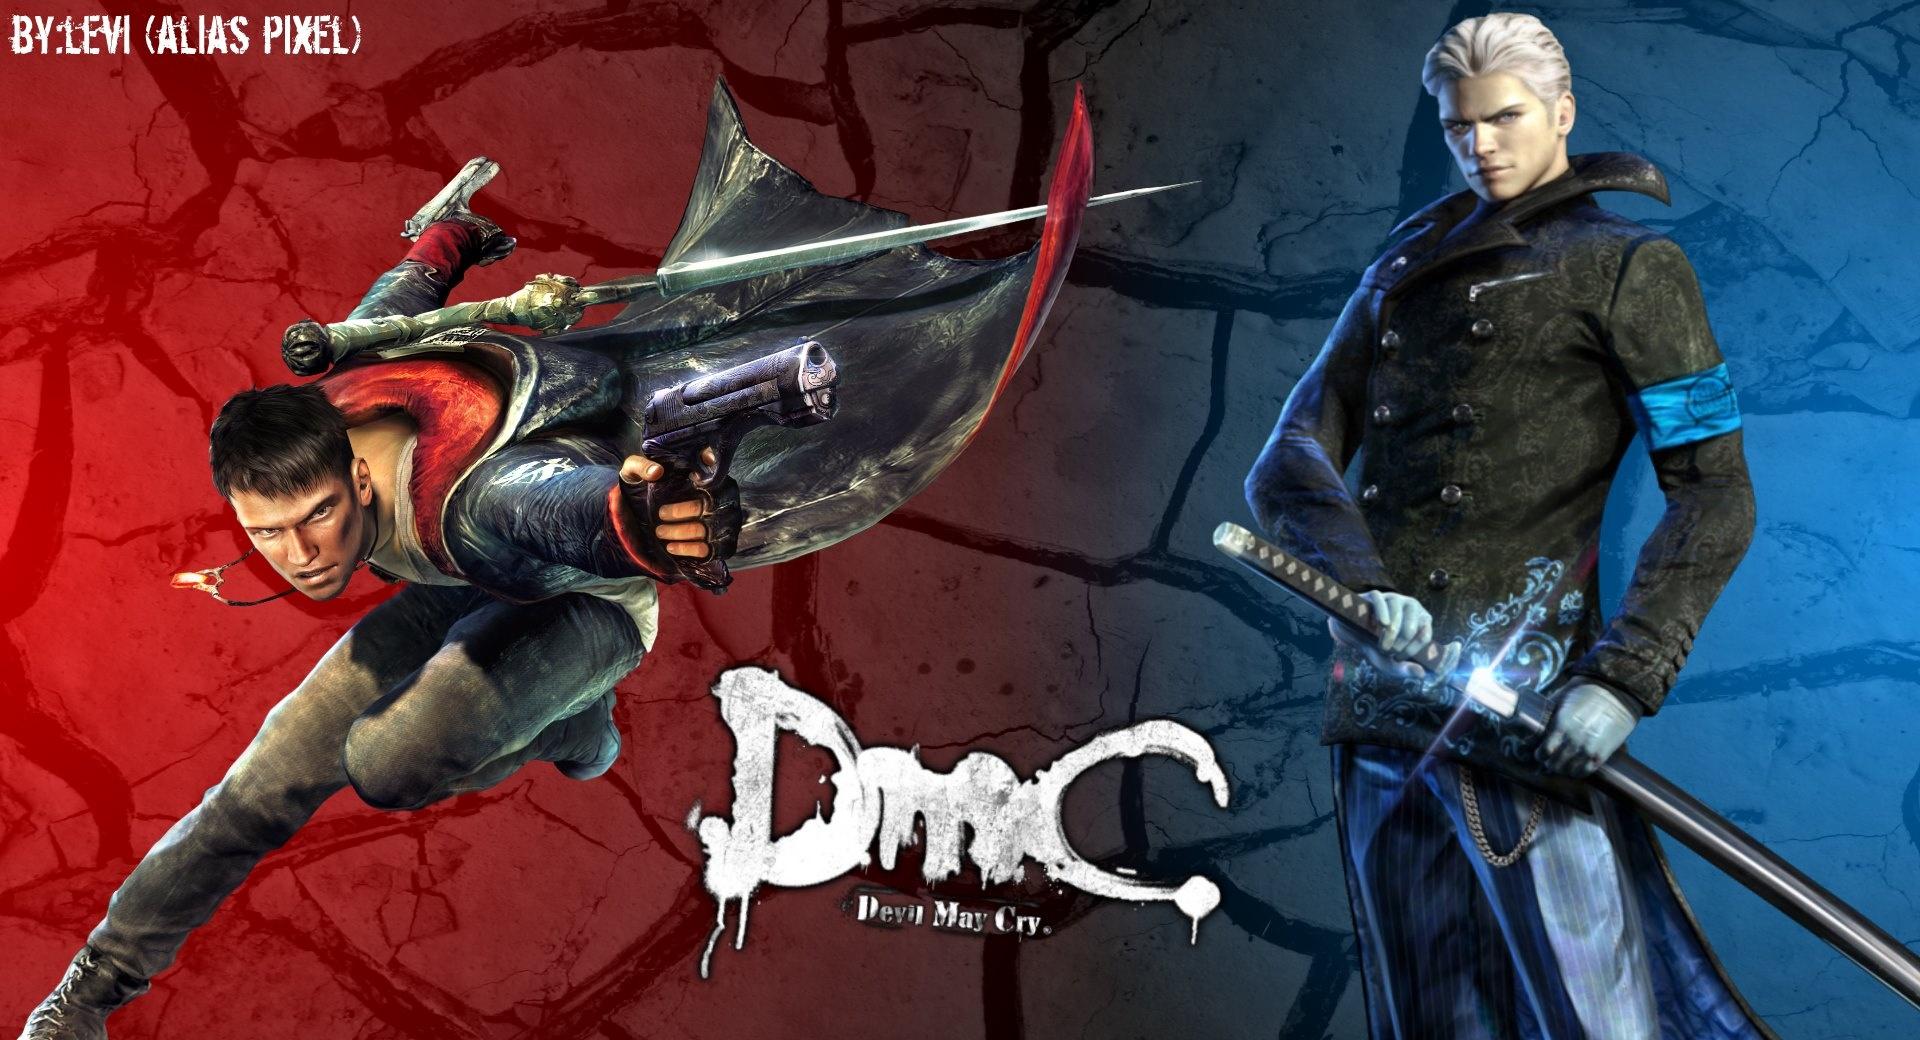 Devil May Cry - Dante Vergil wallpapers HD quality